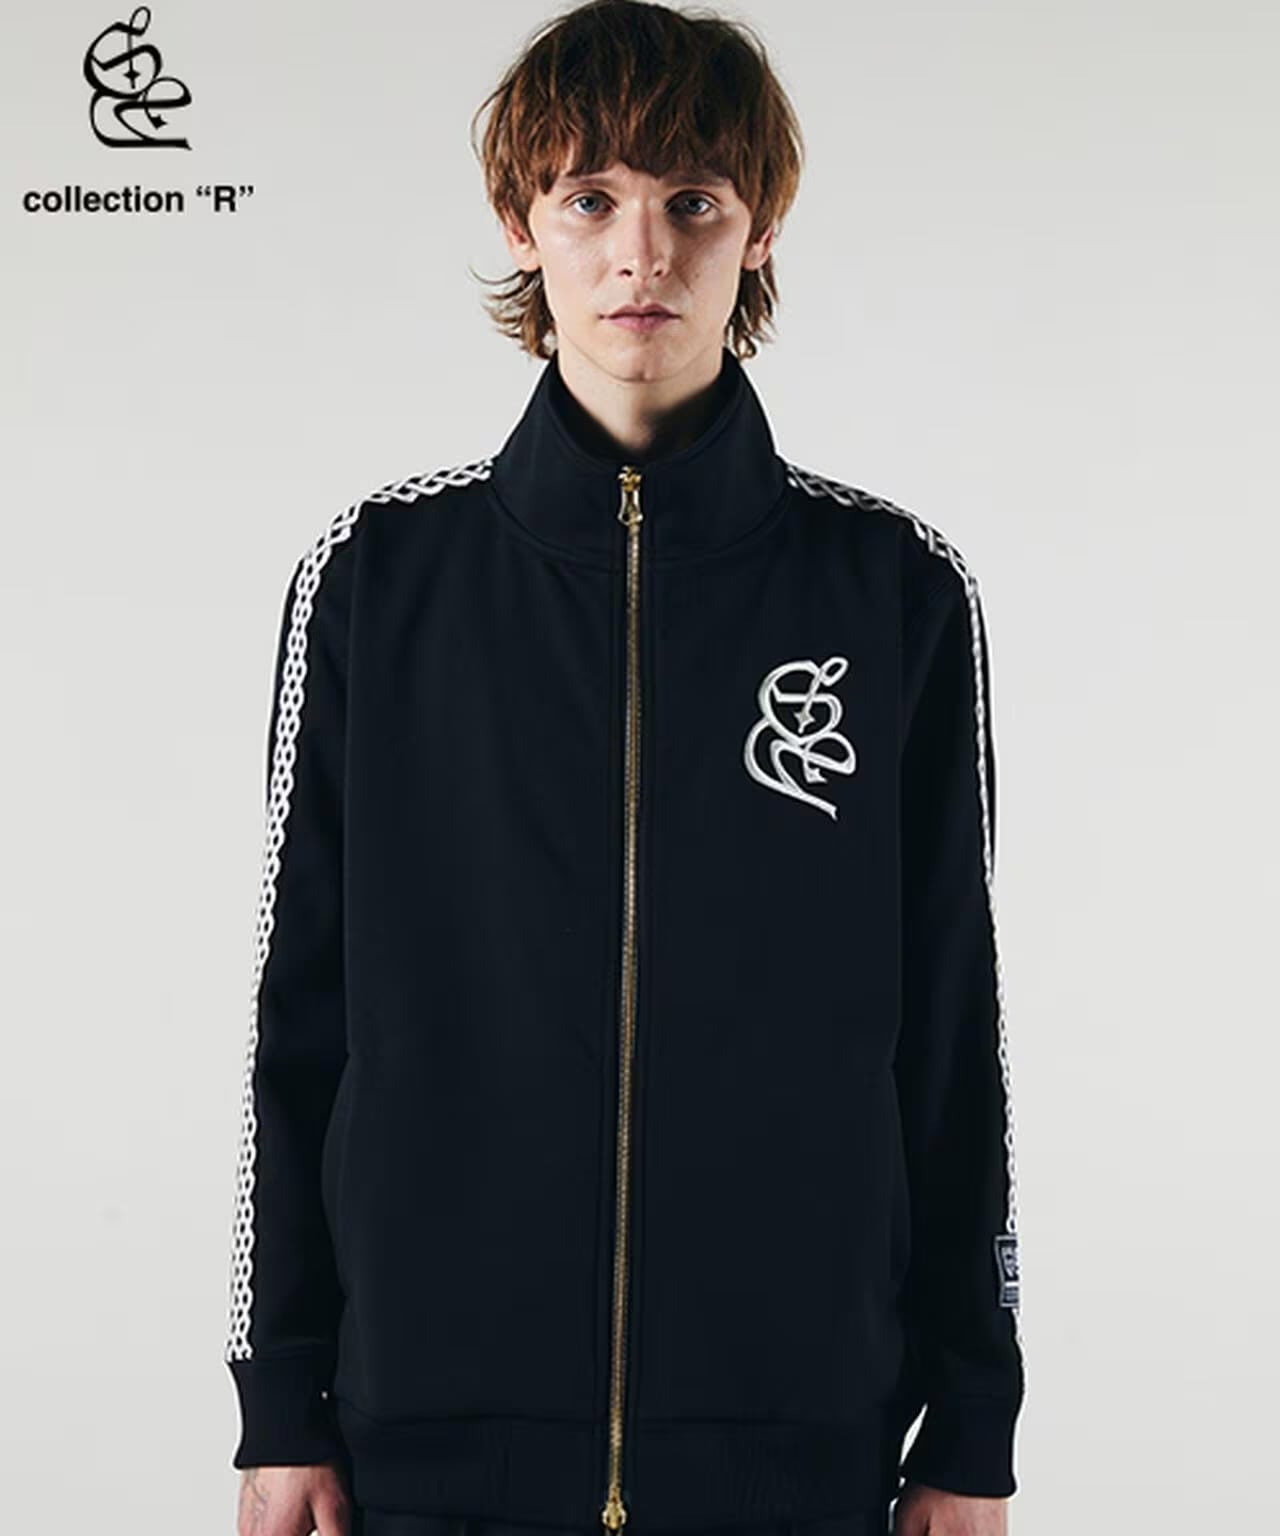 SY32 by SWEETYEARS/collection “R” TRACK JACKET(M Black)｜ ロイヤル ...